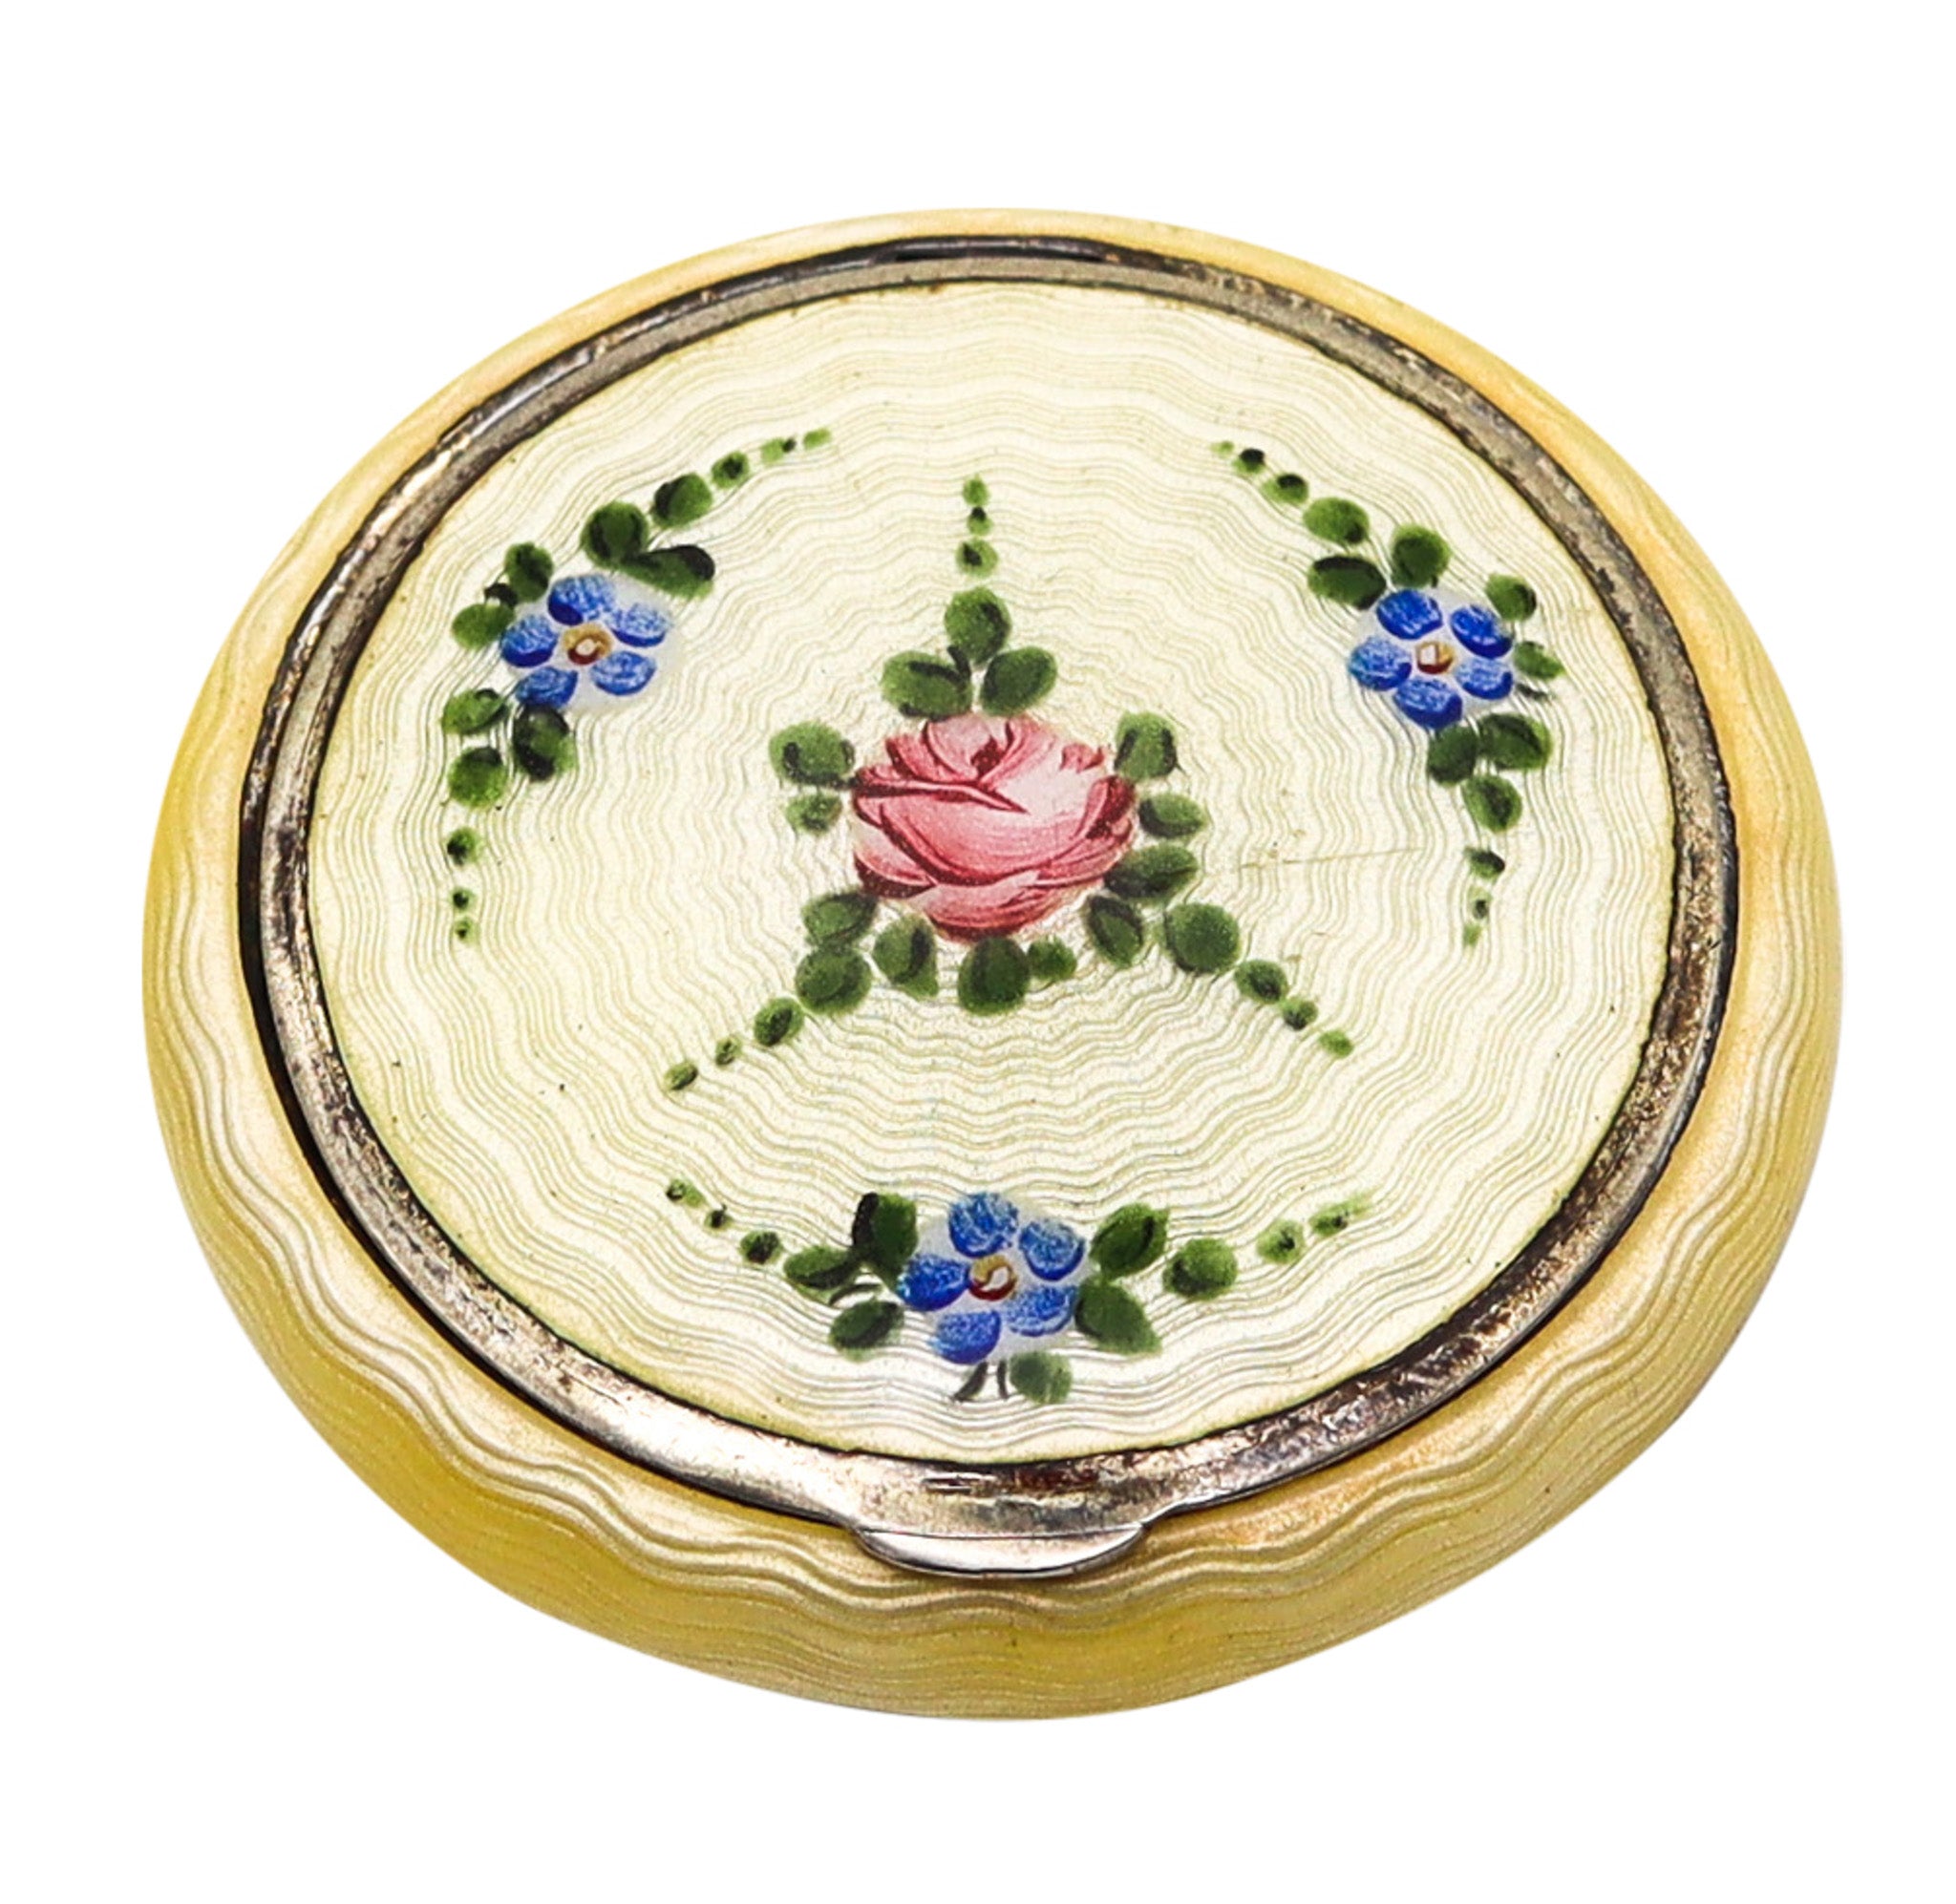 Bliss Brothers 1925 Art Deco Guilloche Yellow Enamel Round Box In 925 Sterling Silver